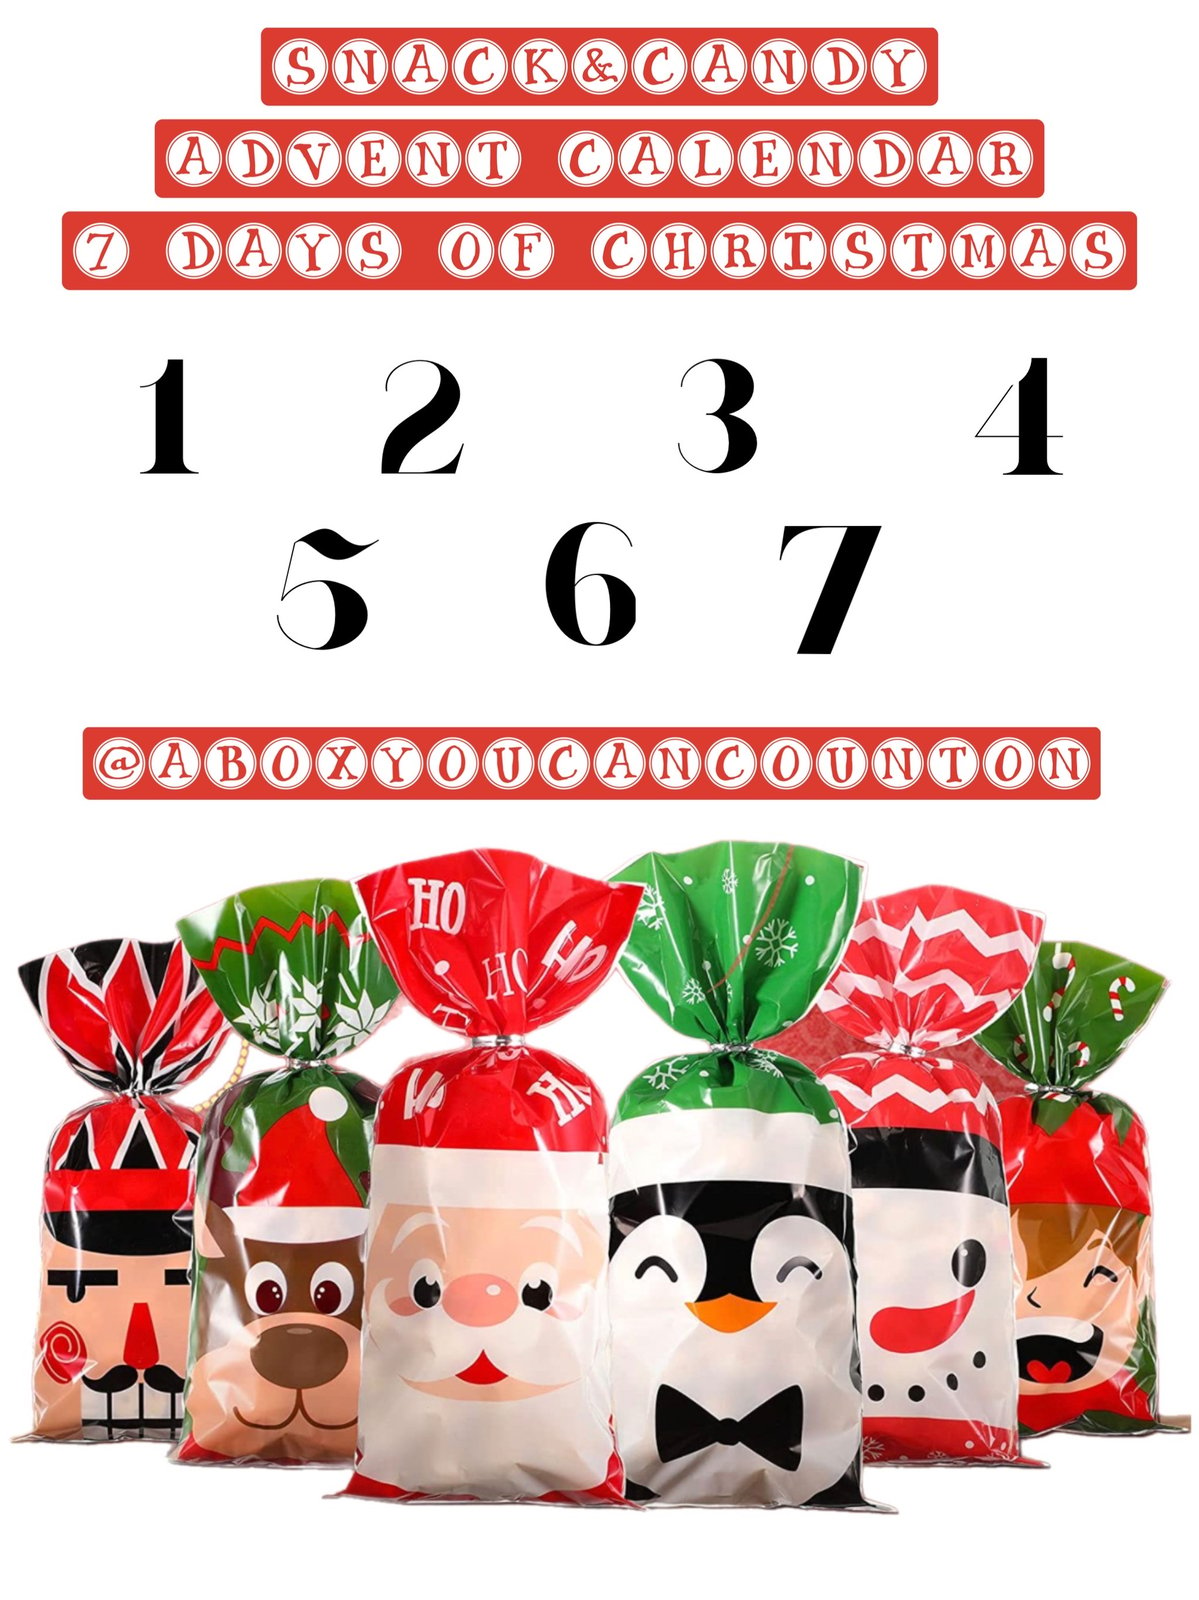 7 Days of Christmas Advent Candy/Snack Calendar A Box You Can Count On